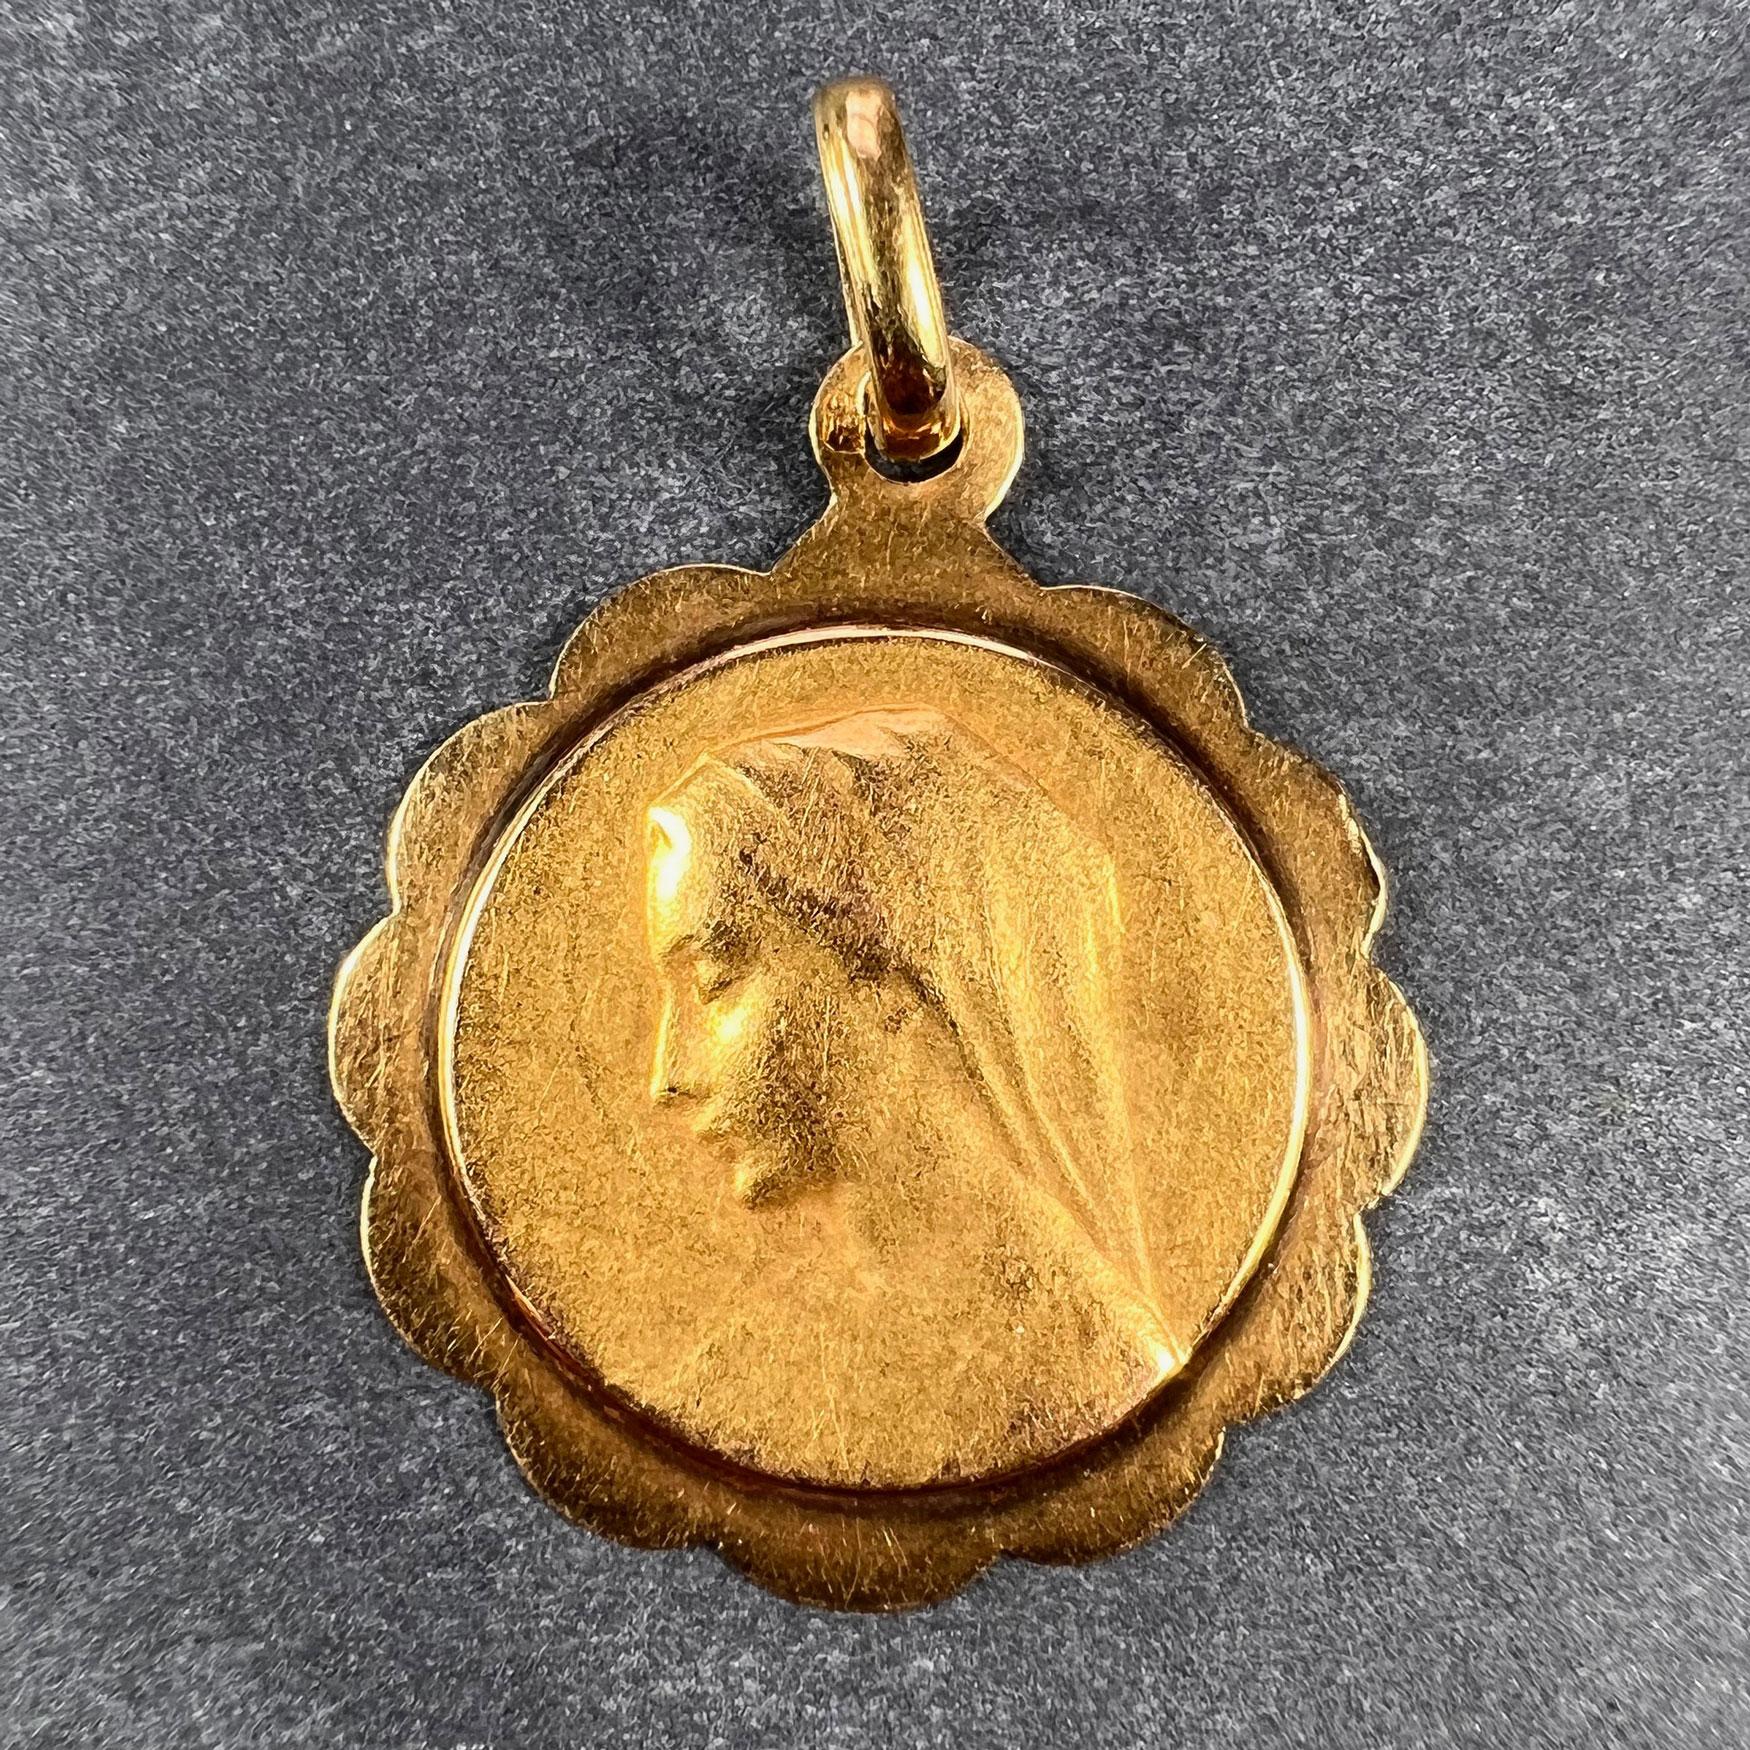 A French 18 karat (18K) yellow gold charm pendant designed as a medal depicting the Virgin Mary within a scalloped frame. Stamped with the horse’s head mark for 18 karat gold and French manufacture between 1838 and 1919, with an unknown maker's